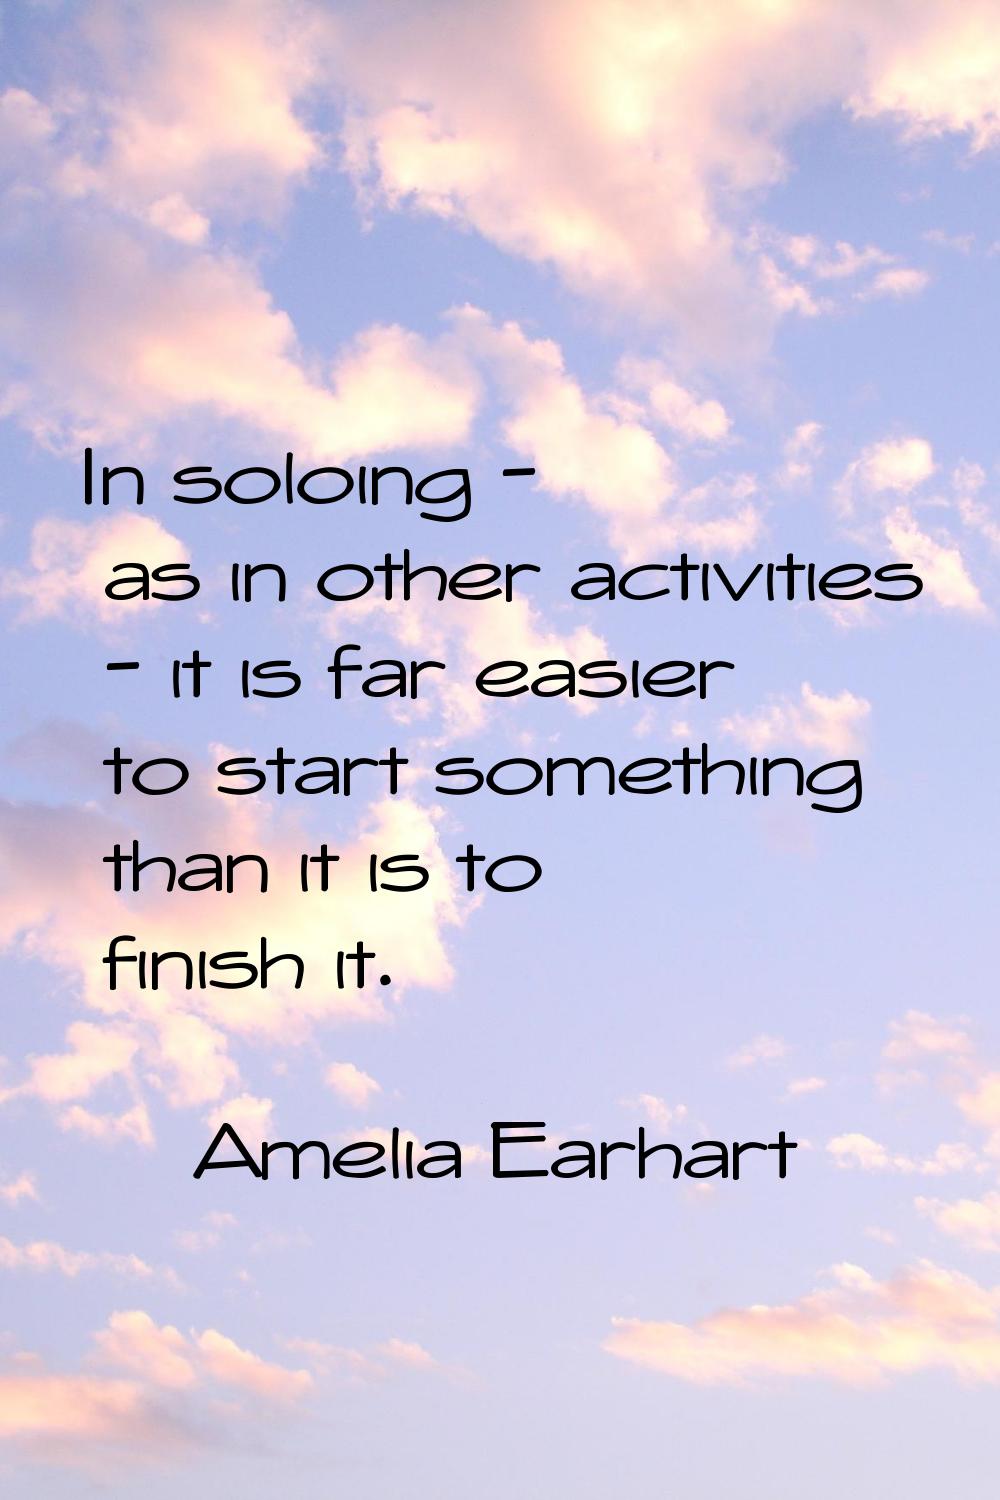 In soloing - as in other activities - it is far easier to start something than it is to finish it.